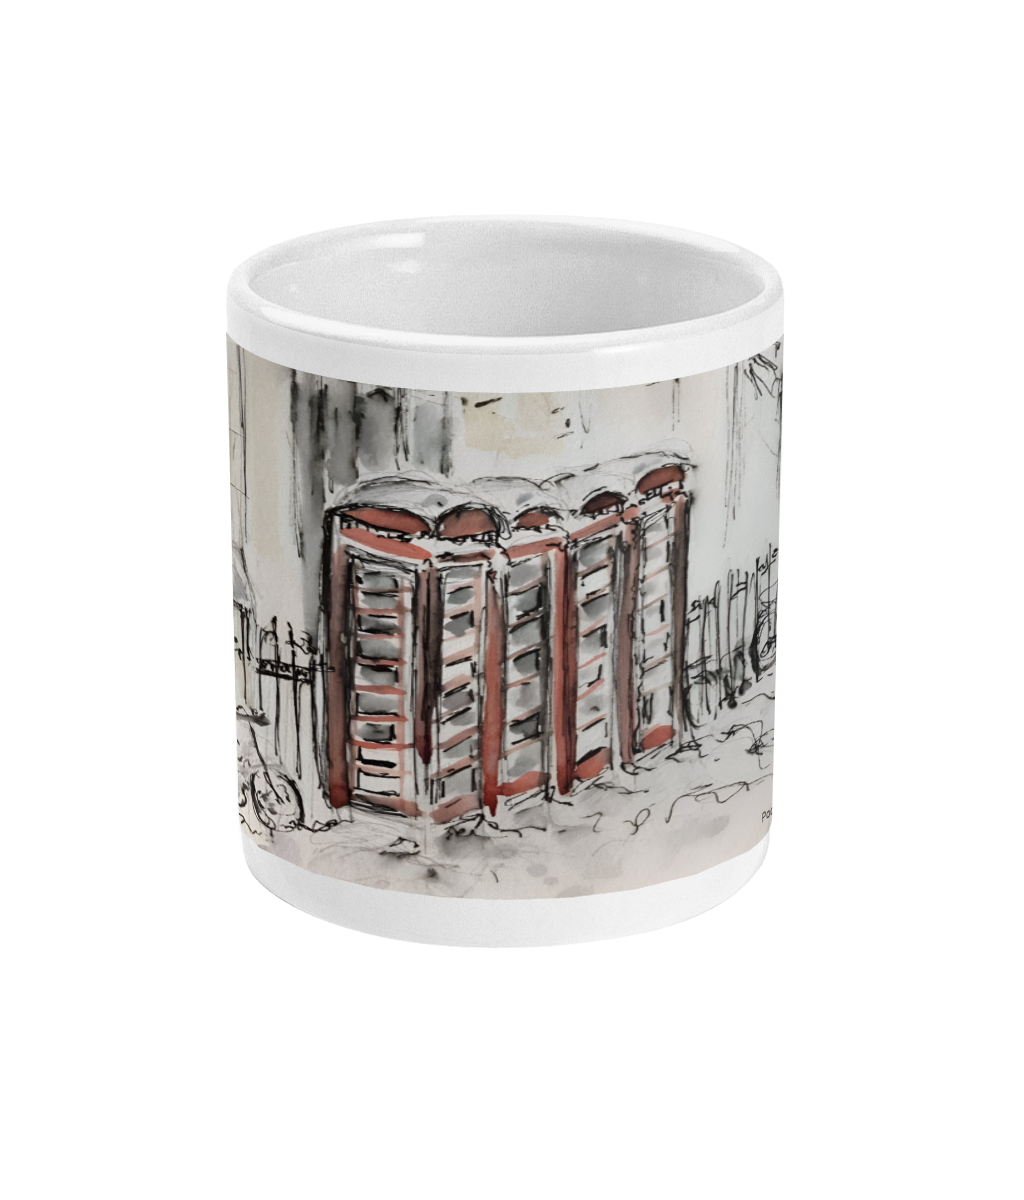 Mug with phone boxes in the snow